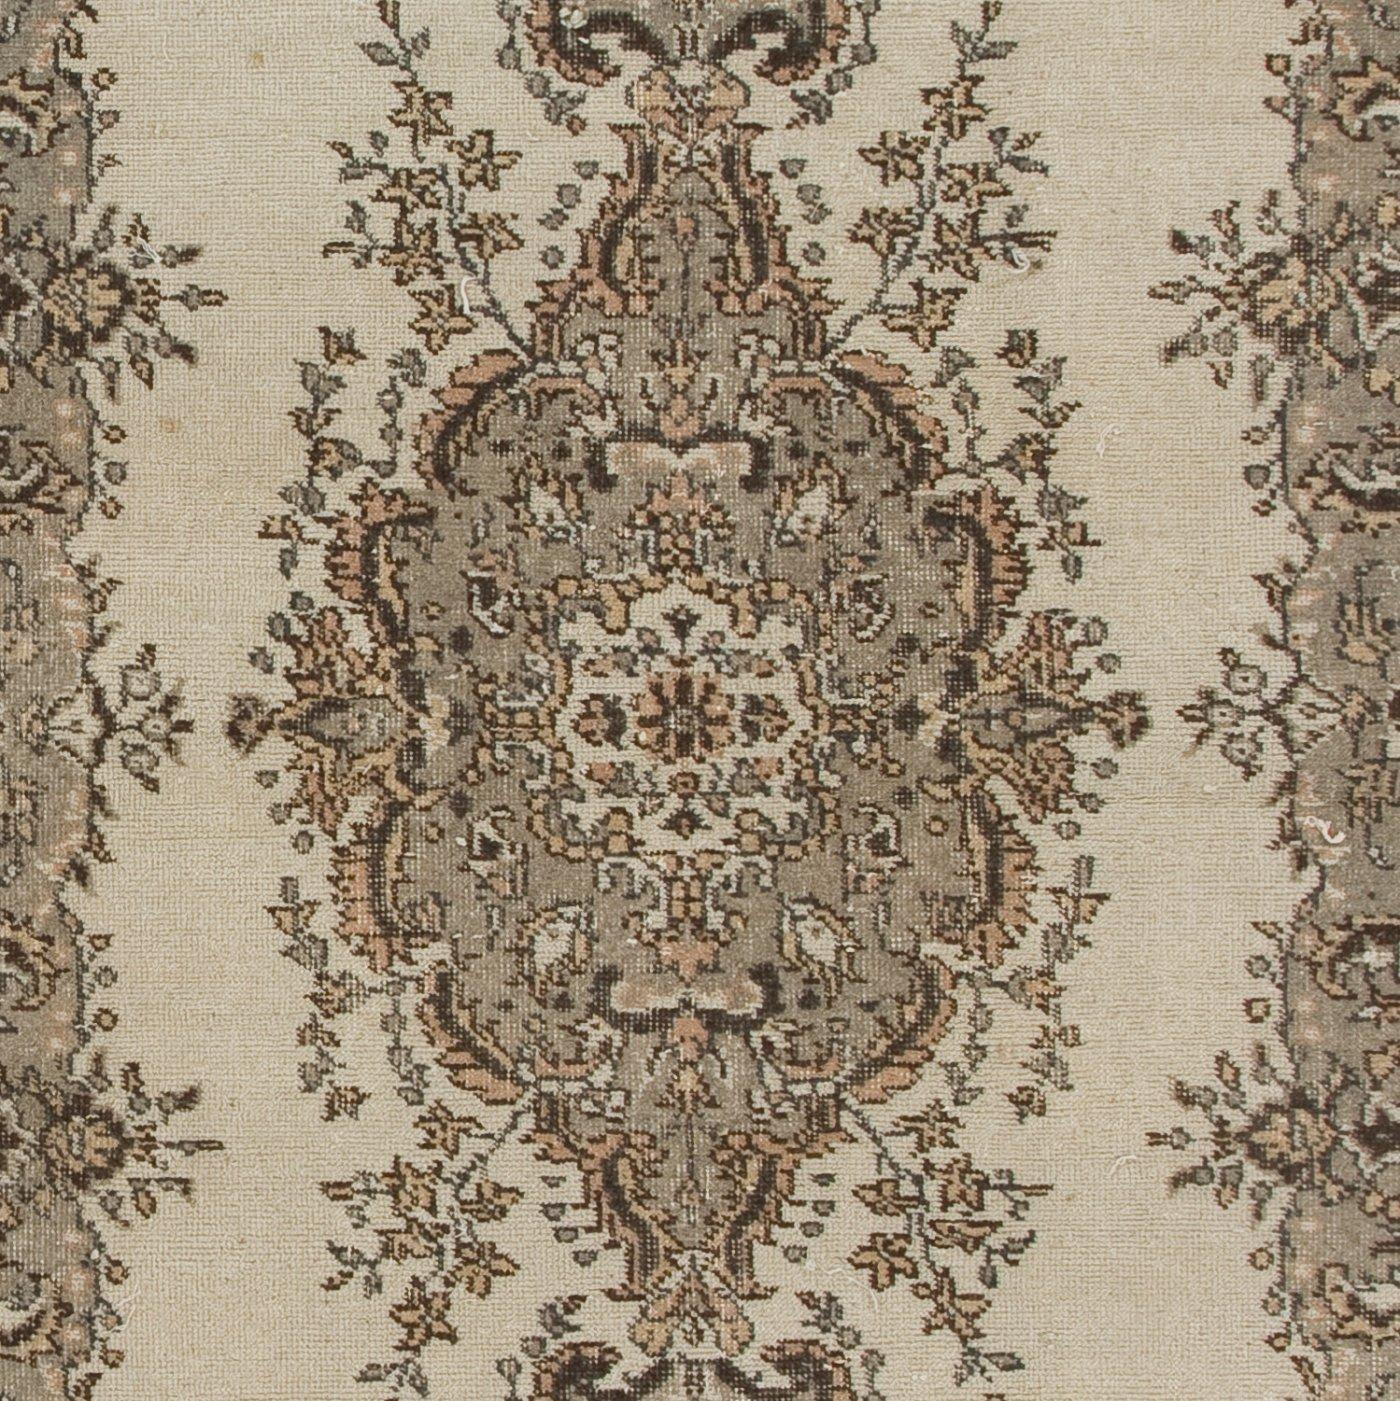 4x6.8 Ft Vintage Hand Knotted Turkish Oushak Wool Area Rug in Beige, Gray In Good Condition For Sale In Philadelphia, PA